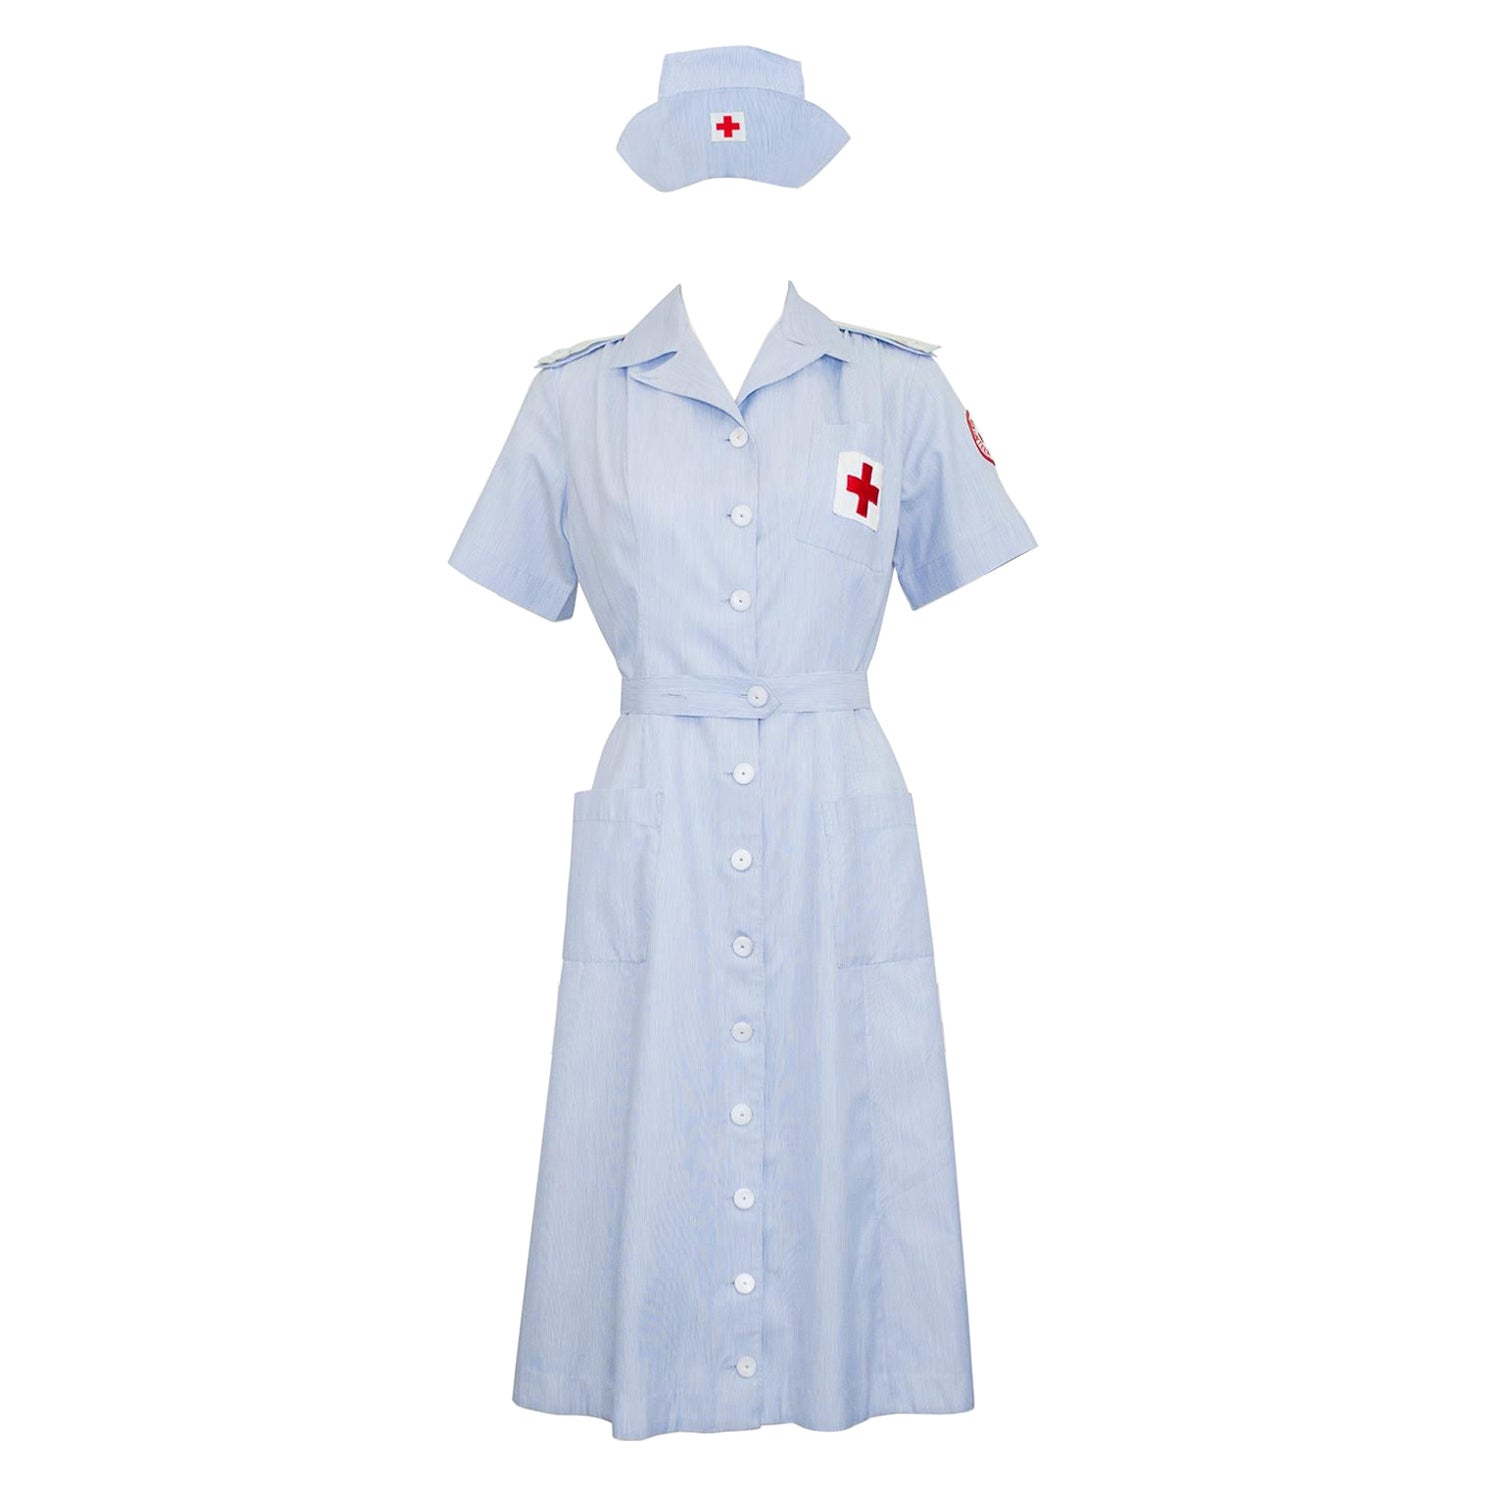 1950's American Red Cross Volunteer Uniform Mint Condition For Sale